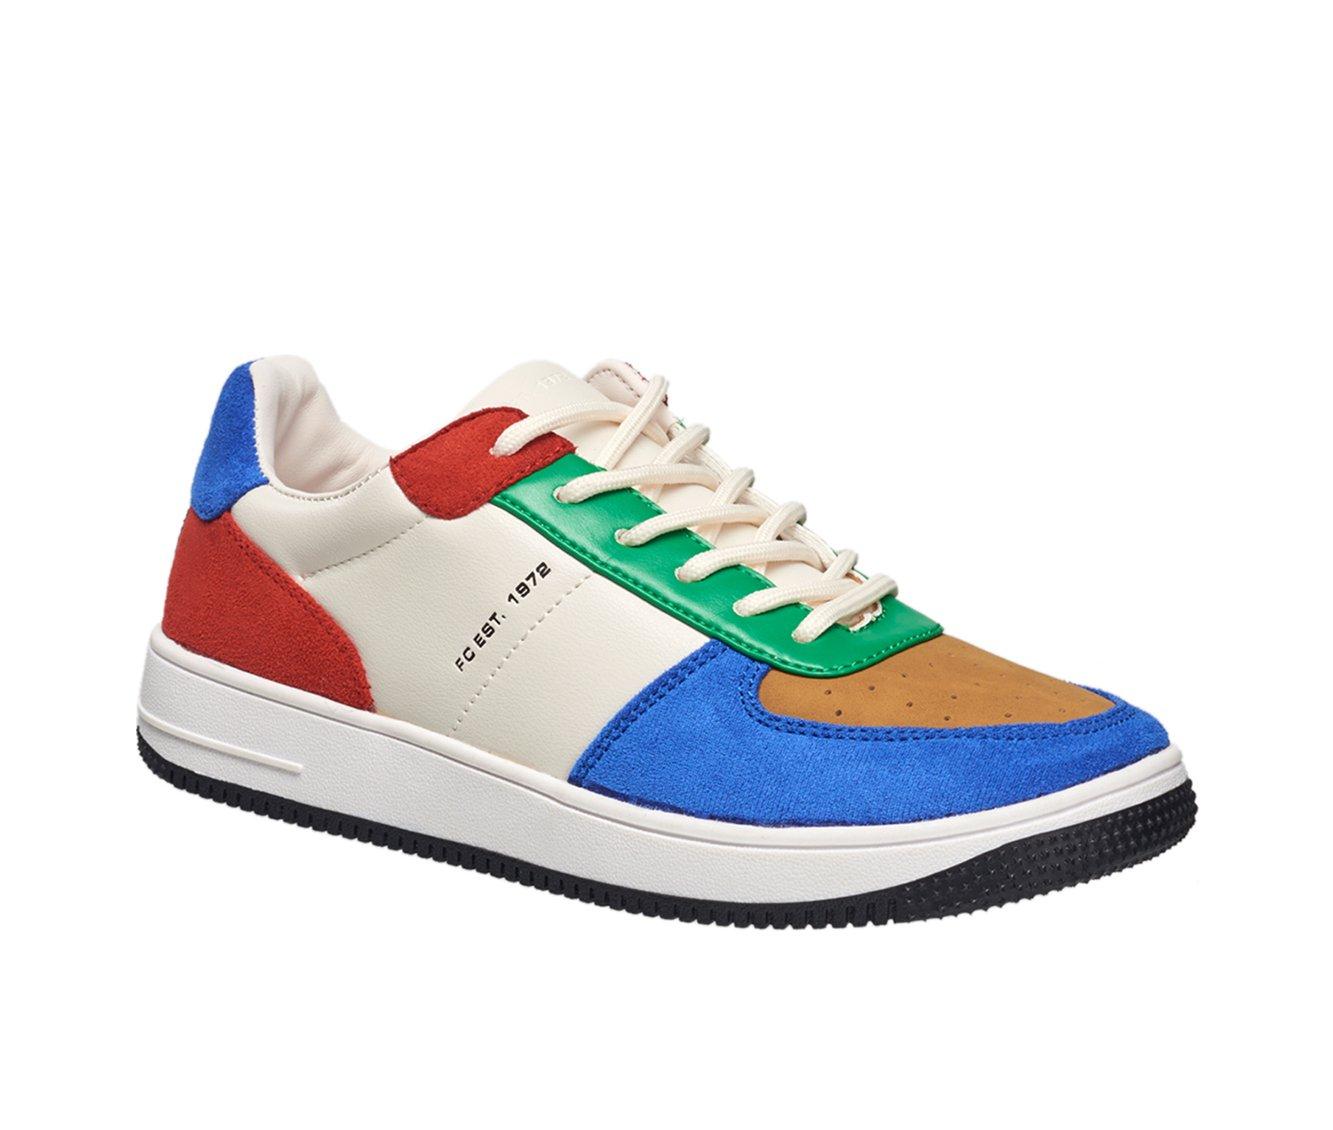 Women's French Connection Brie Sneakers